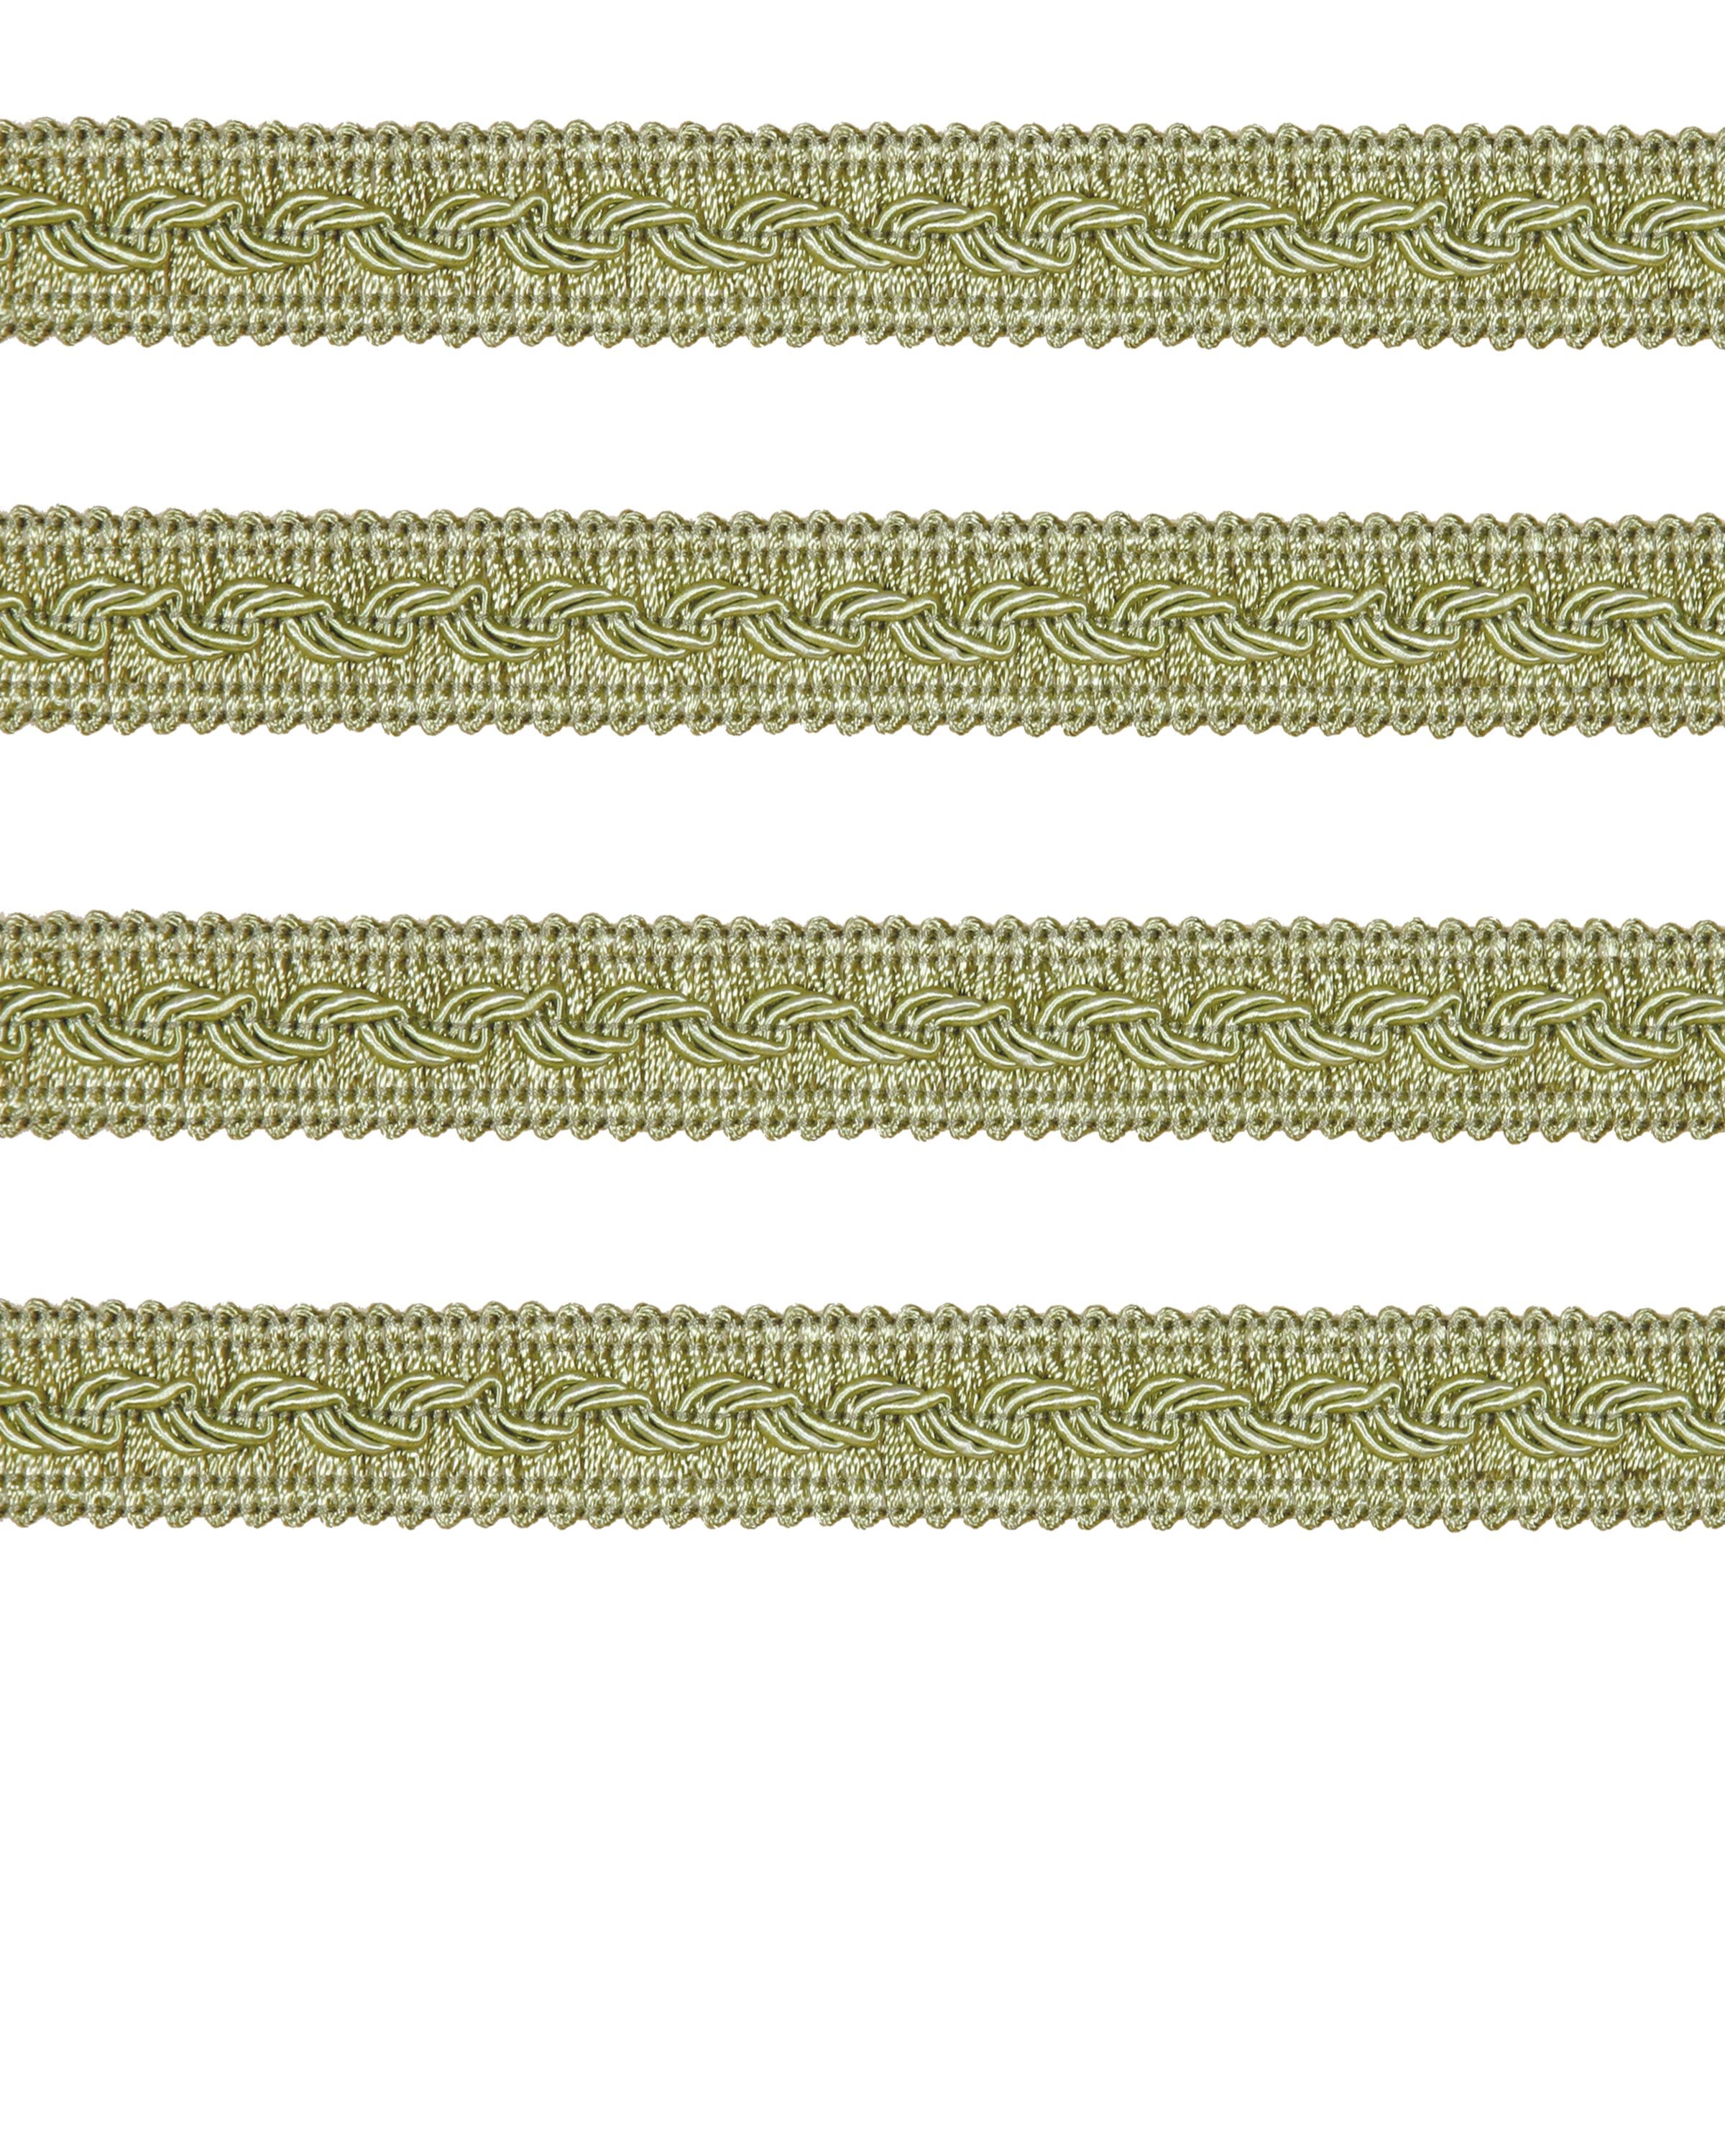 Small Fancy Braid - Antique Green 17mm Price is for 5 metres